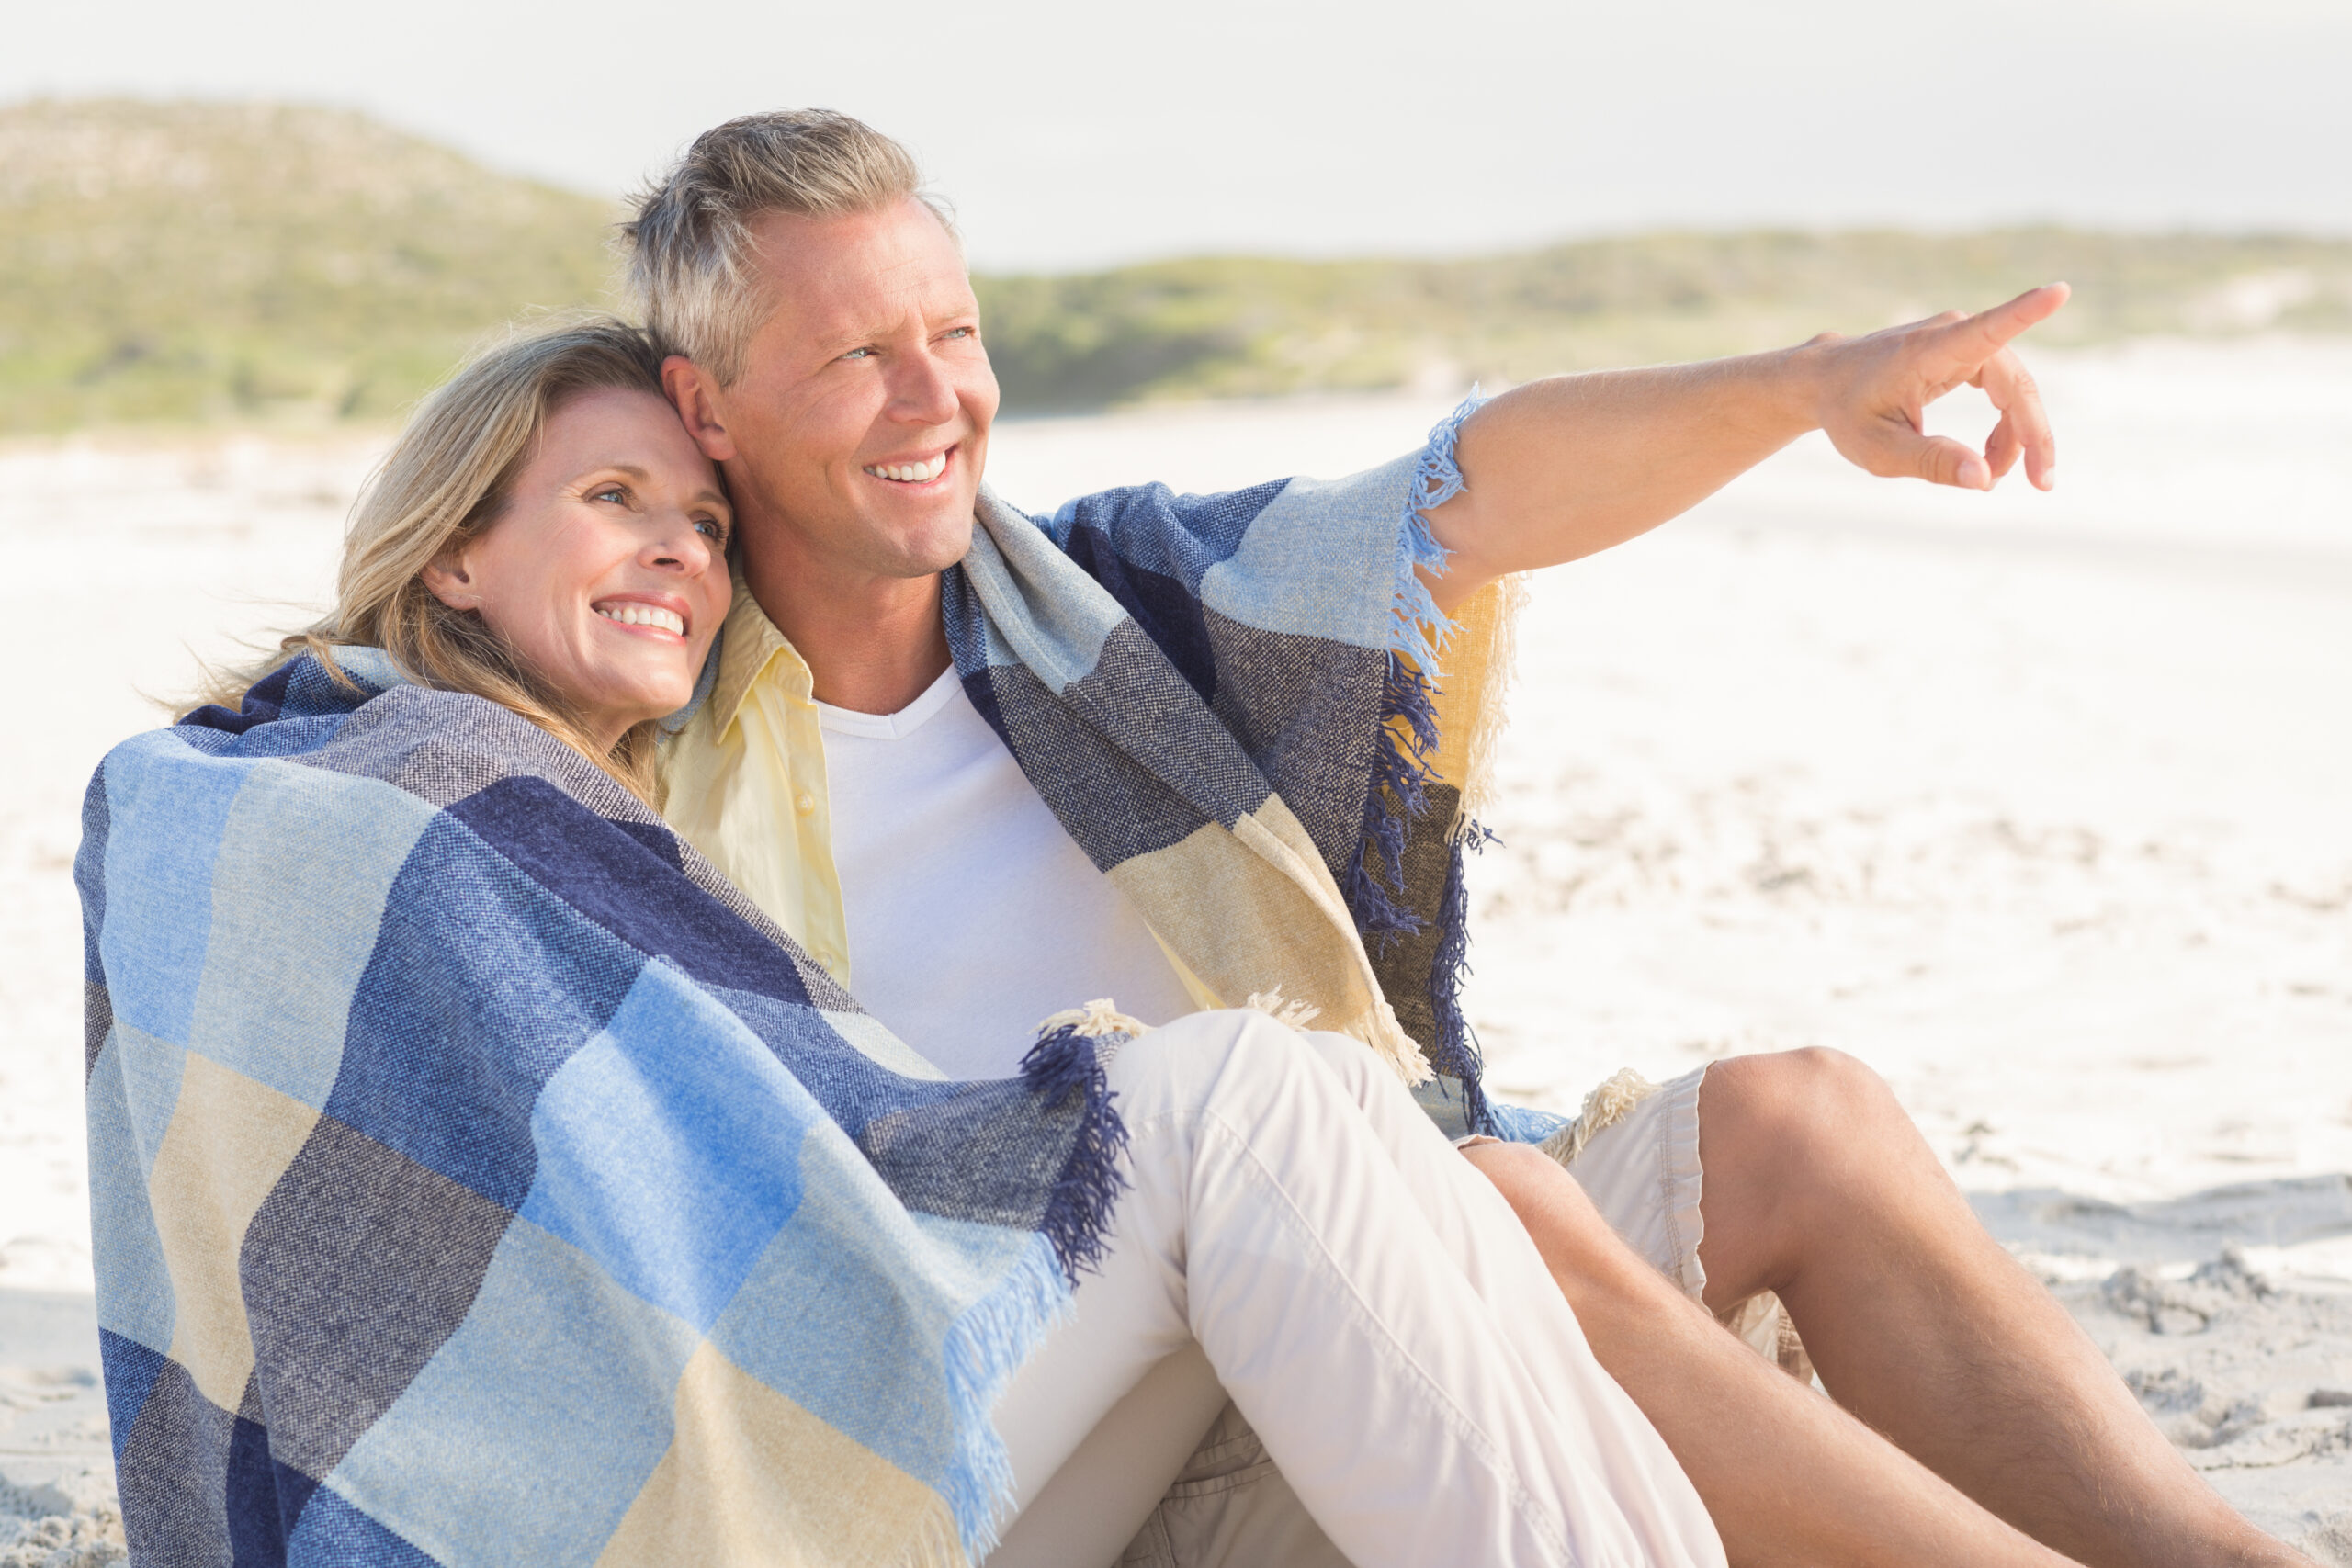 hormone pellet therapy for women and men